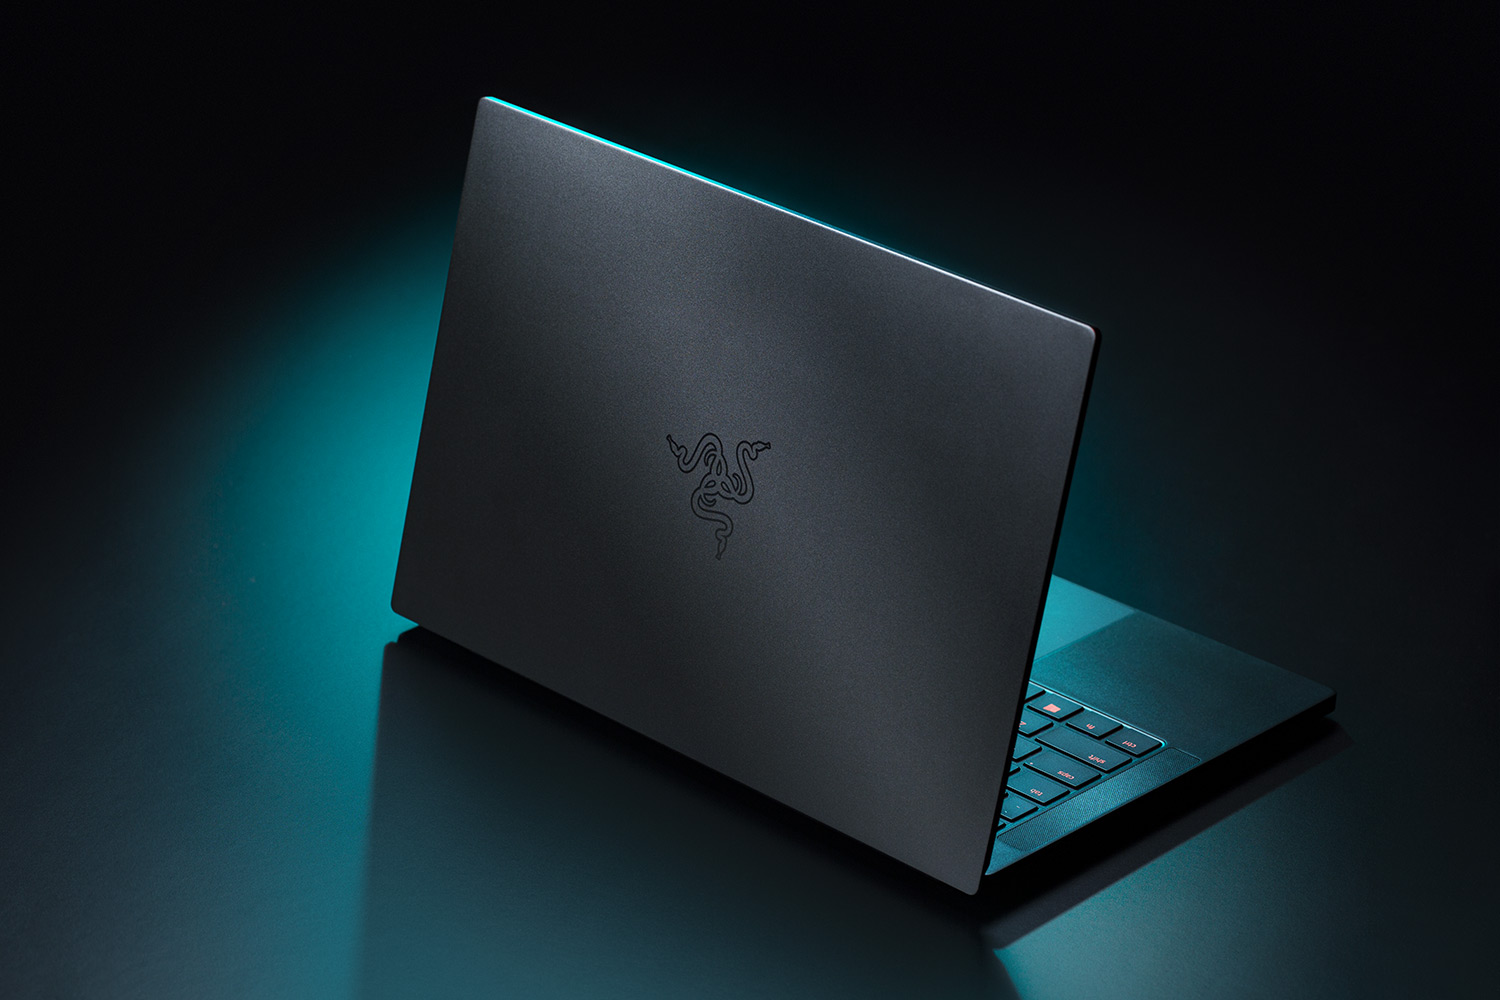 The 2019 Razer Blade Stealth series was a huge mess. The 2020 